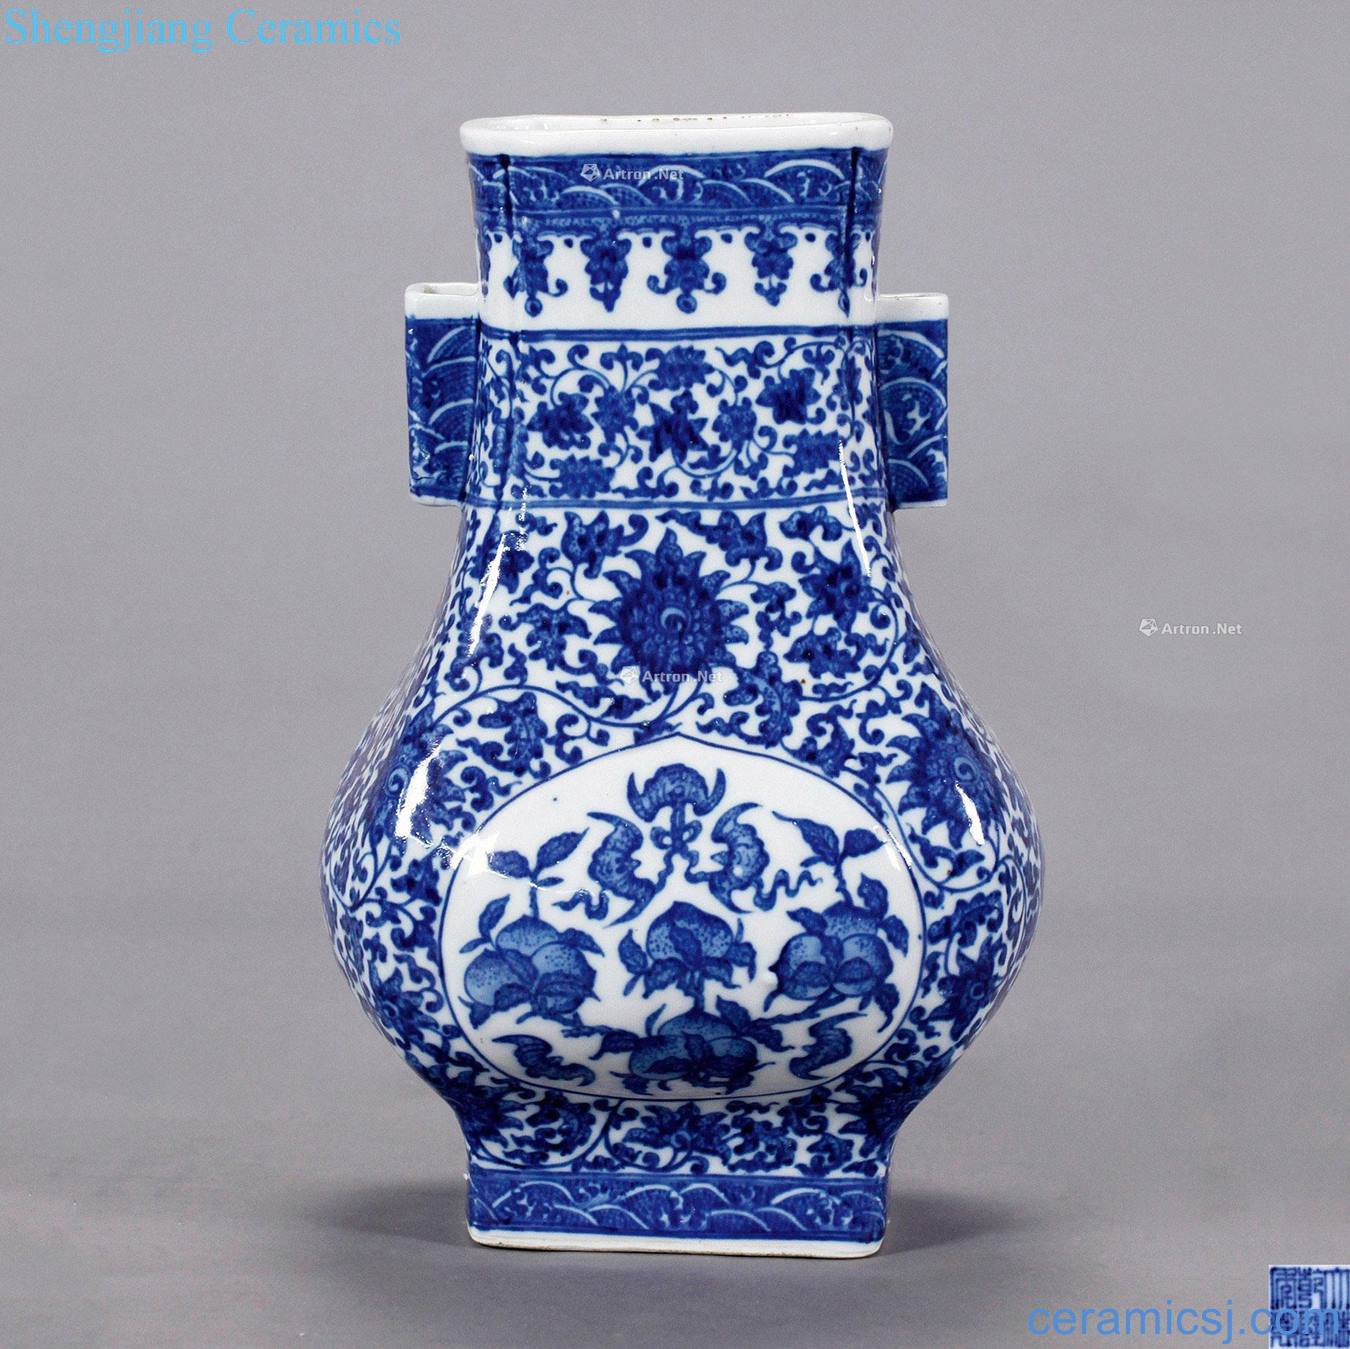 Qing qianlong vase with a blue and white penetration